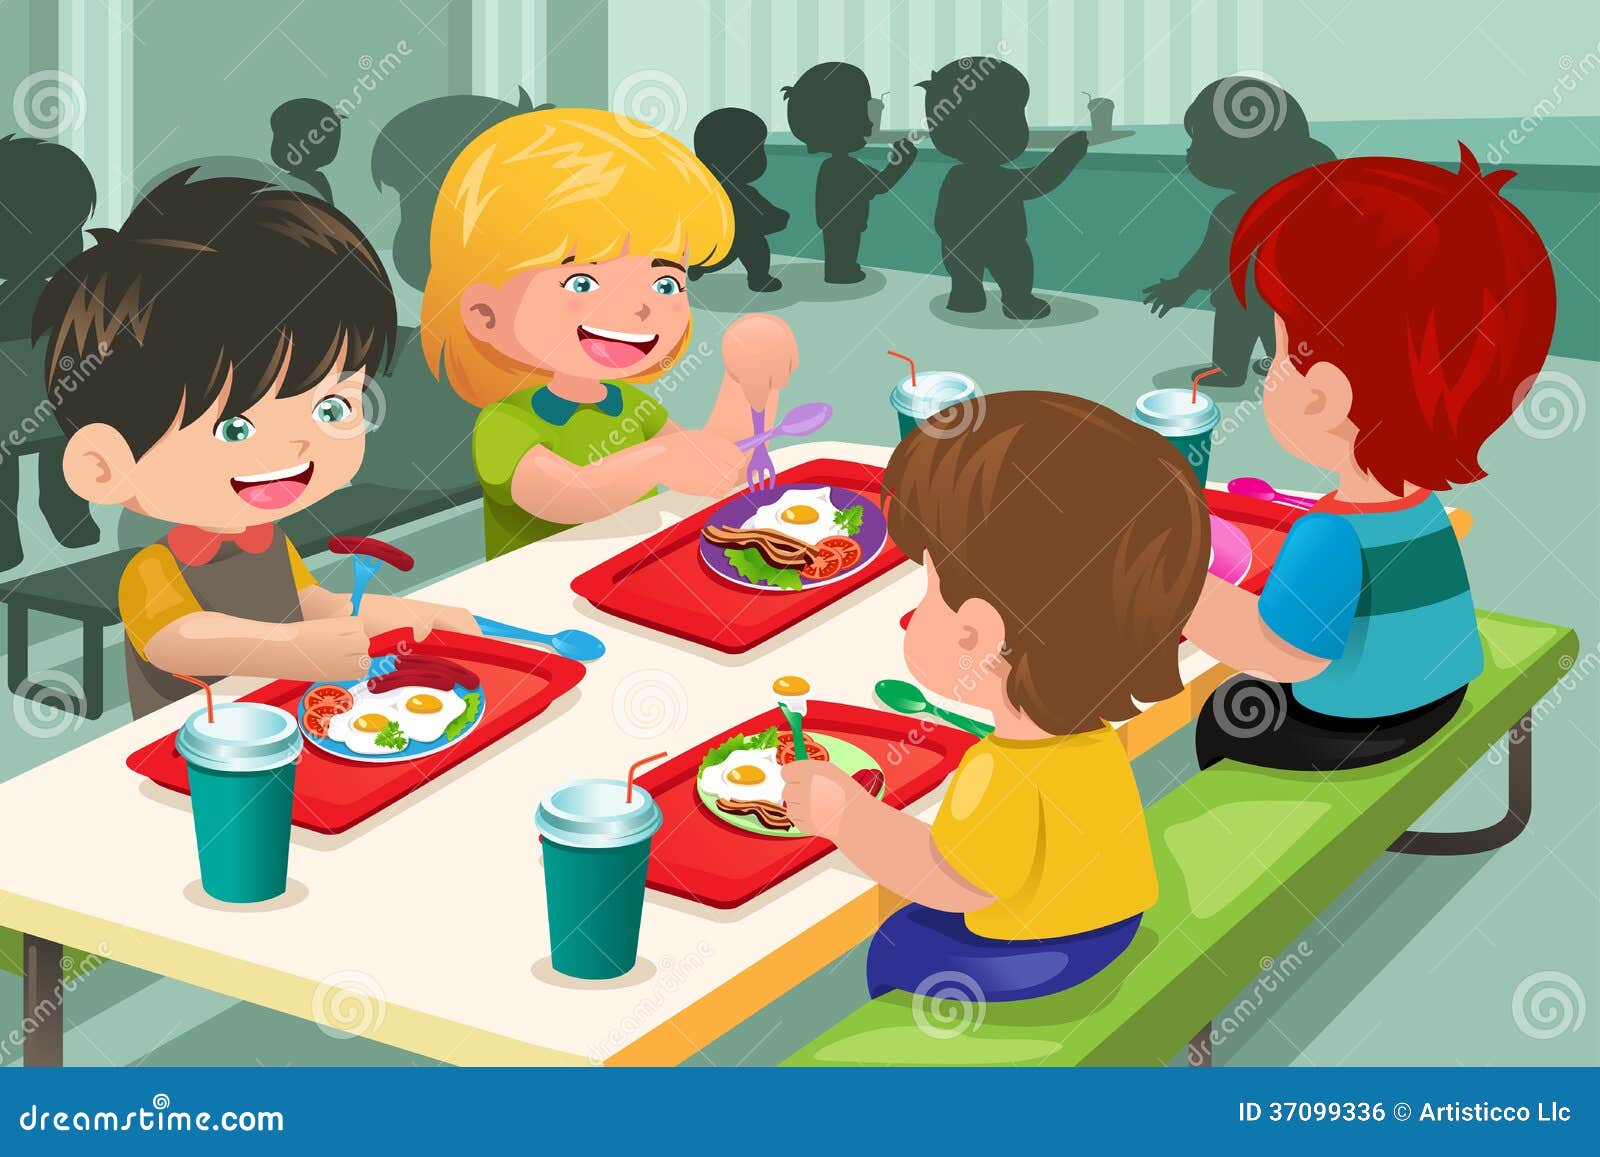 school lunch clipart - photo #48